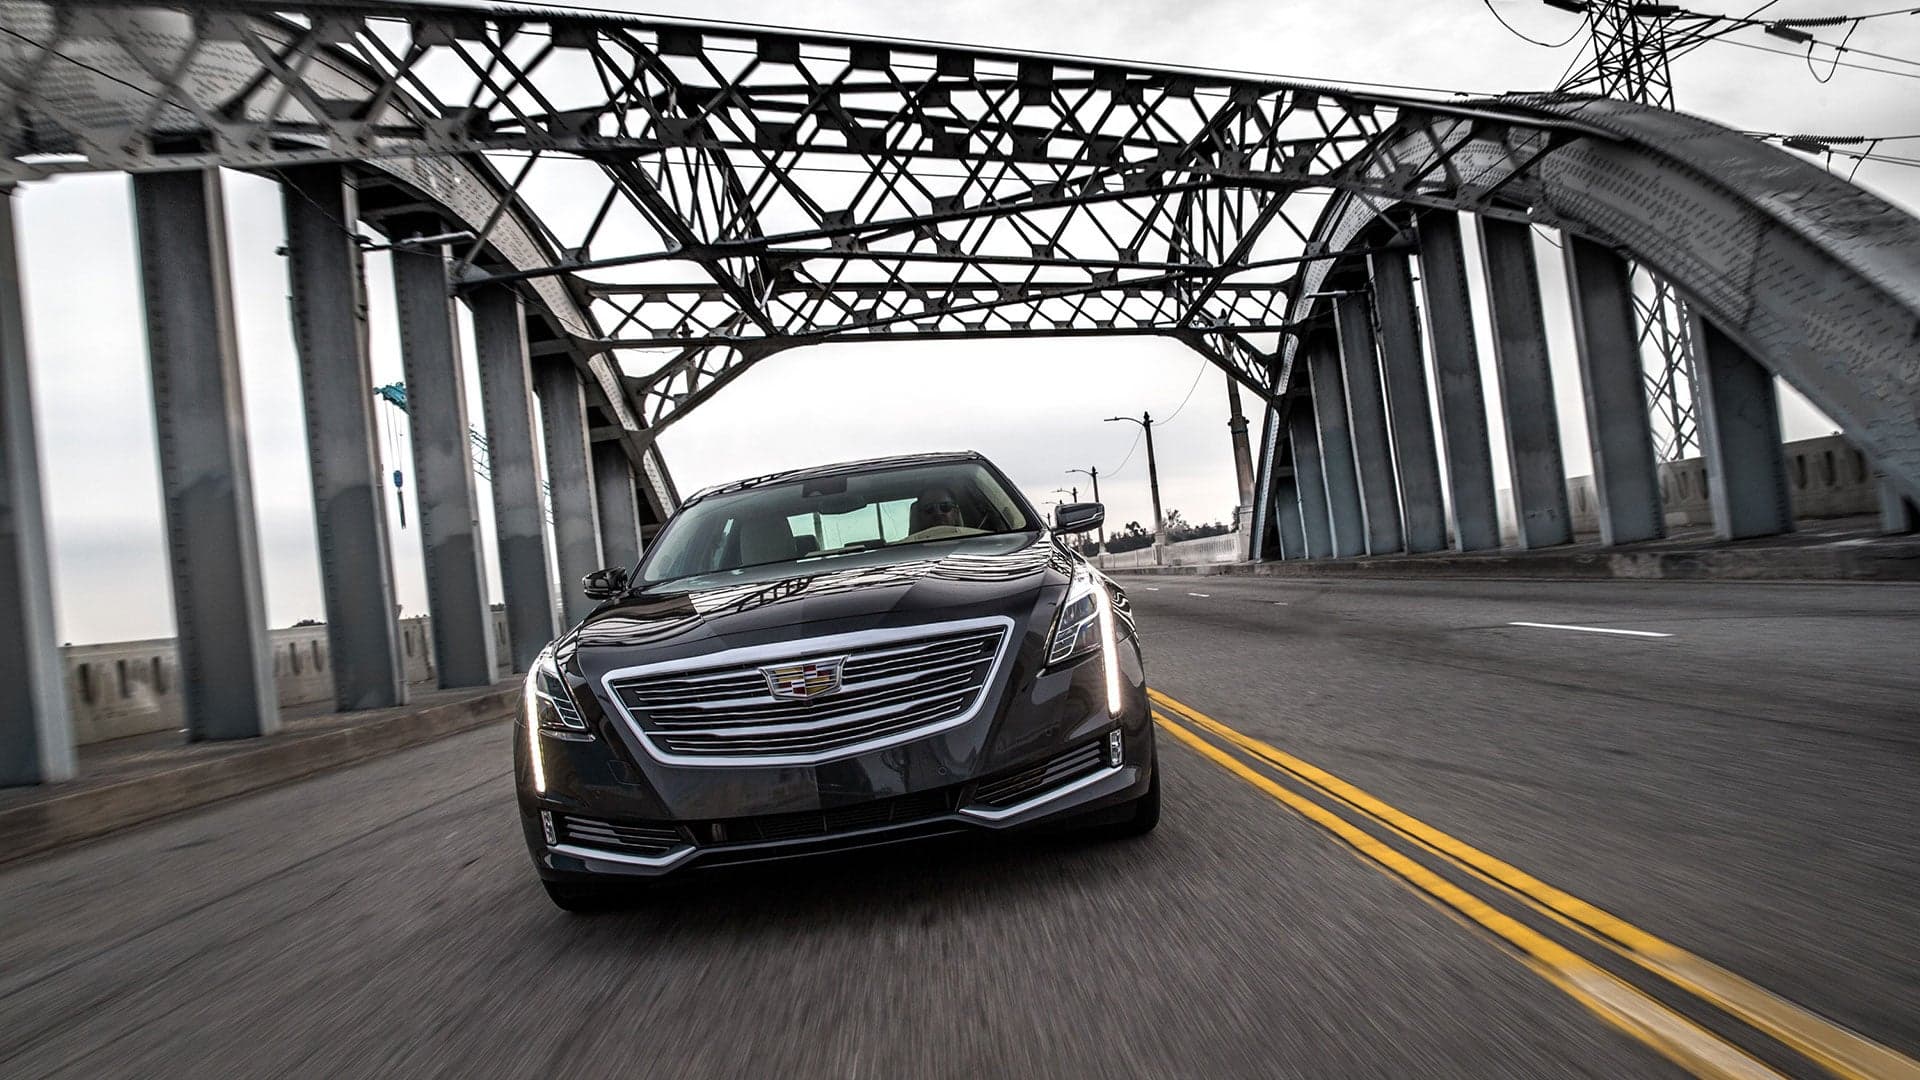 The 2016 Cadillac CT6 Premium Luxury Group Review